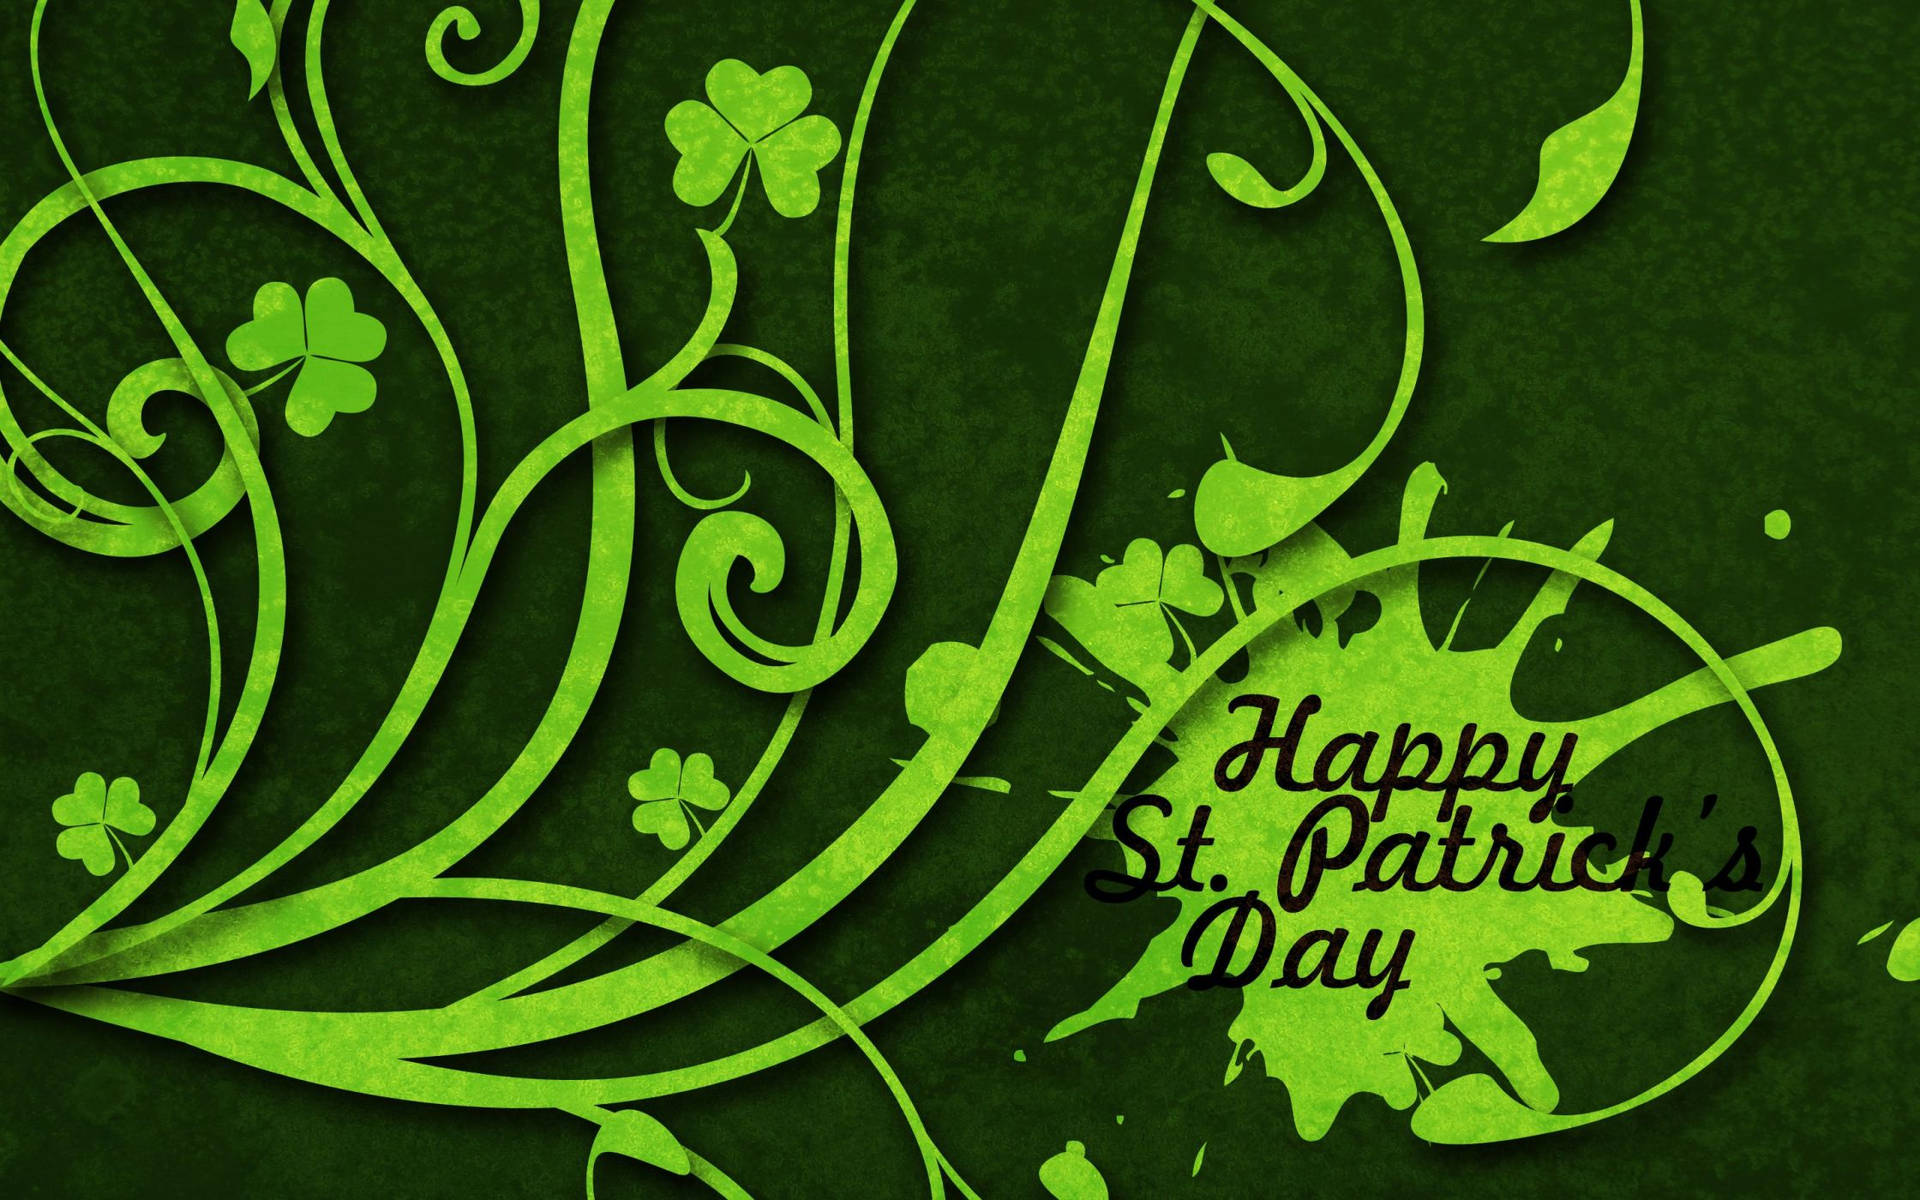 Saint Patrick’s Day With Green Paint Splatter Background